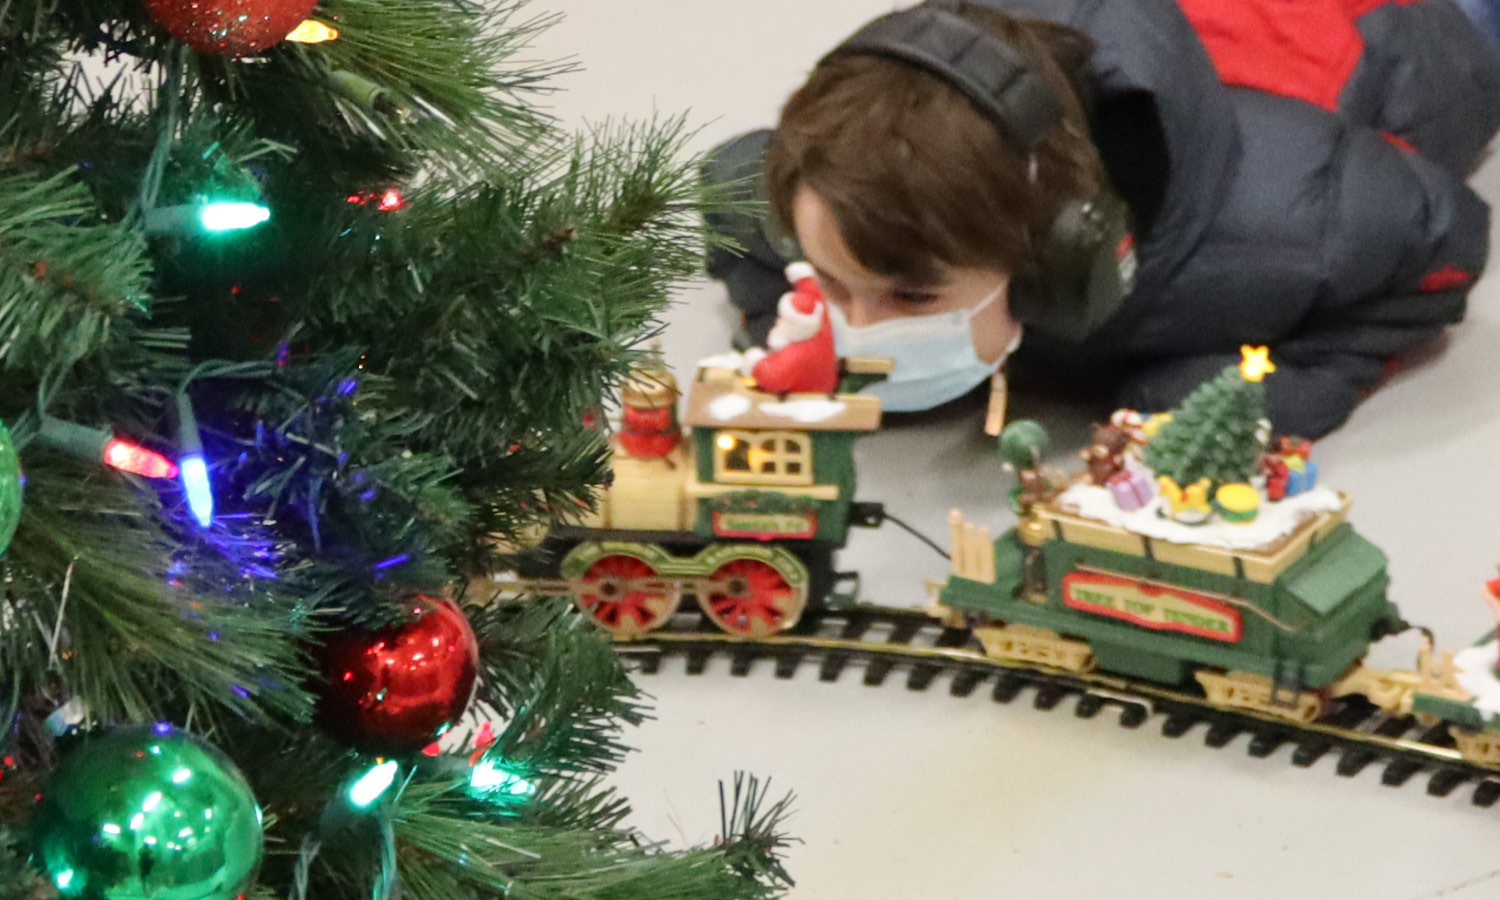 Boy looks at toy train set under a Christmas tree.